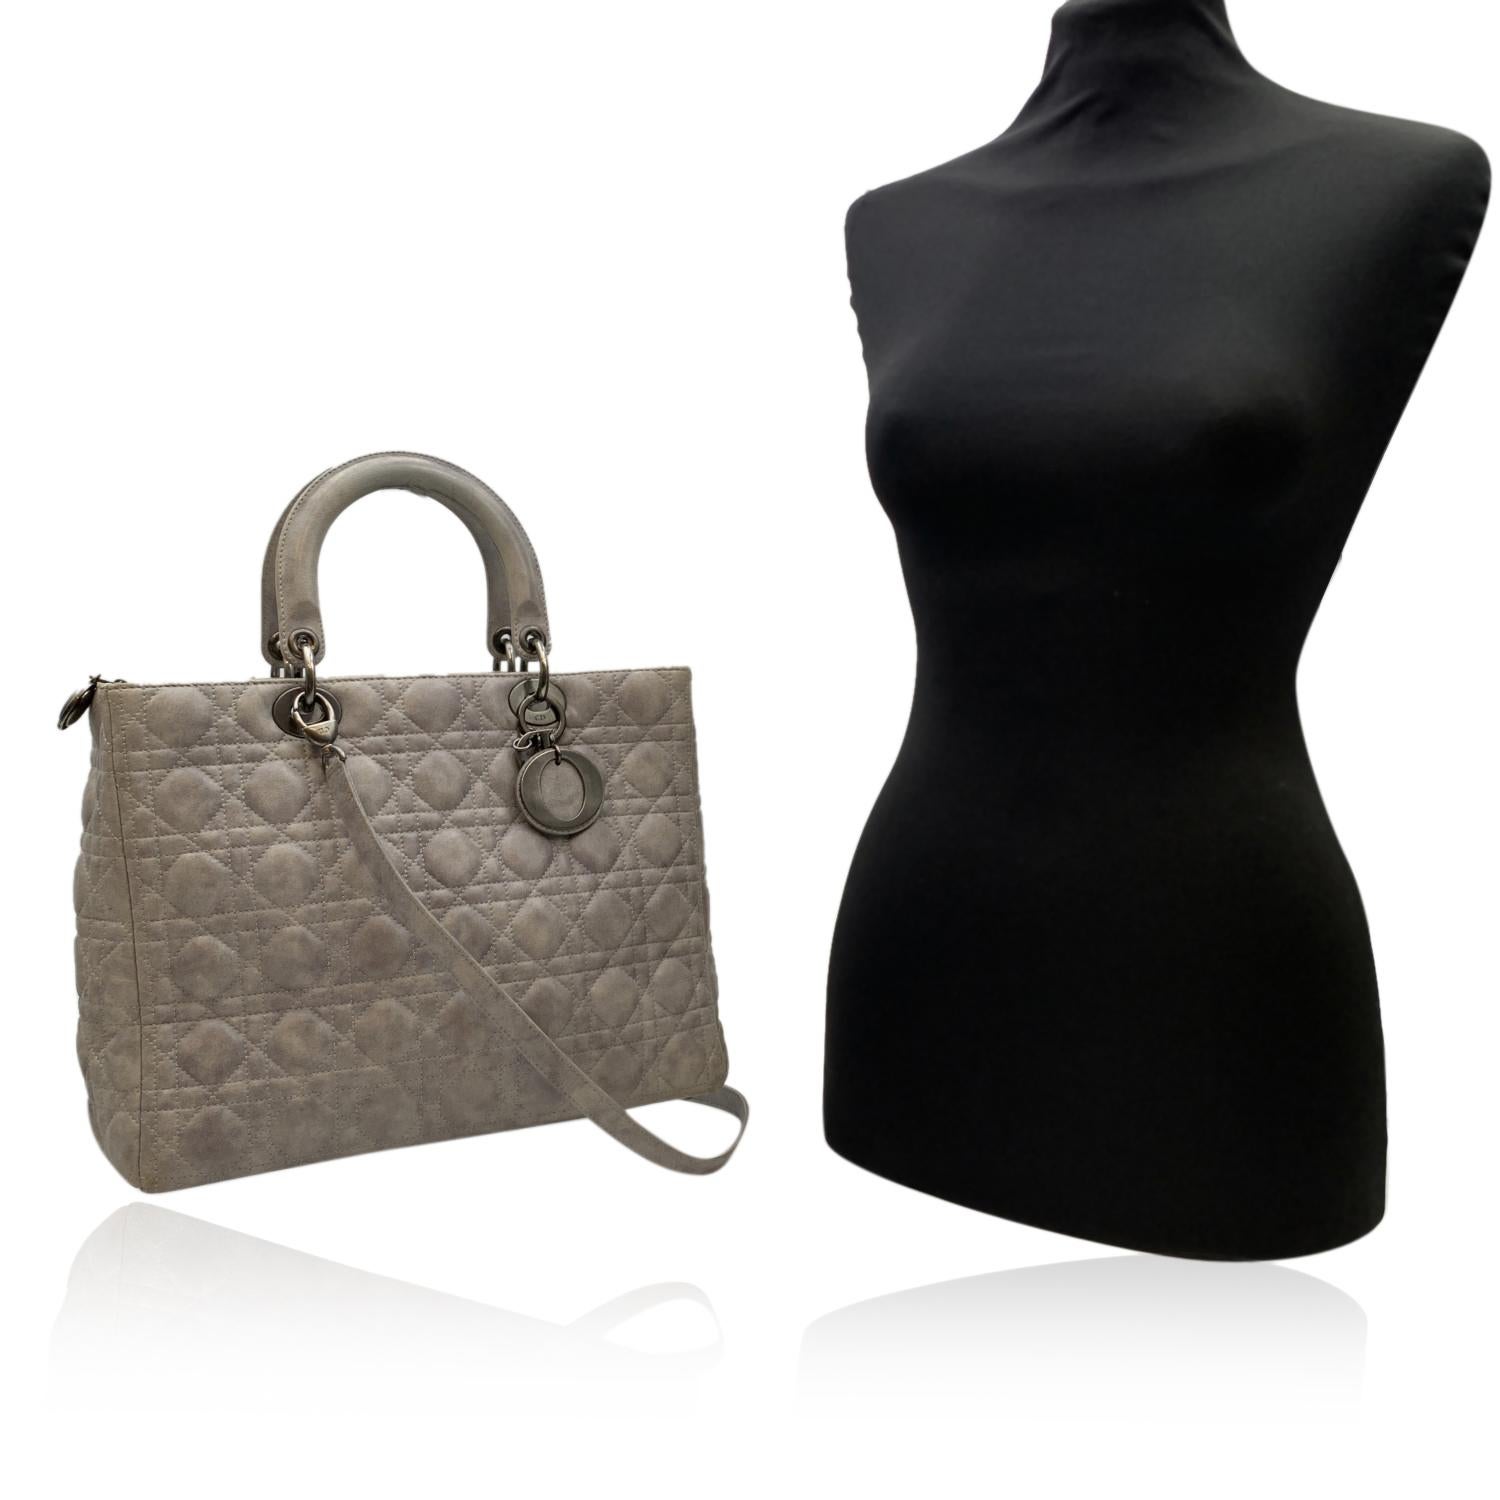 Timeless and unique work of art, the LADY DIOR bag has all the Couture spirit of Dior. Crafted by hand, this light grey leather bag is enhanced by iconic Dior 'Cannage' stitching. The iconic 'cannage' pattern by CHRISTIAN DIOR is inspired by the